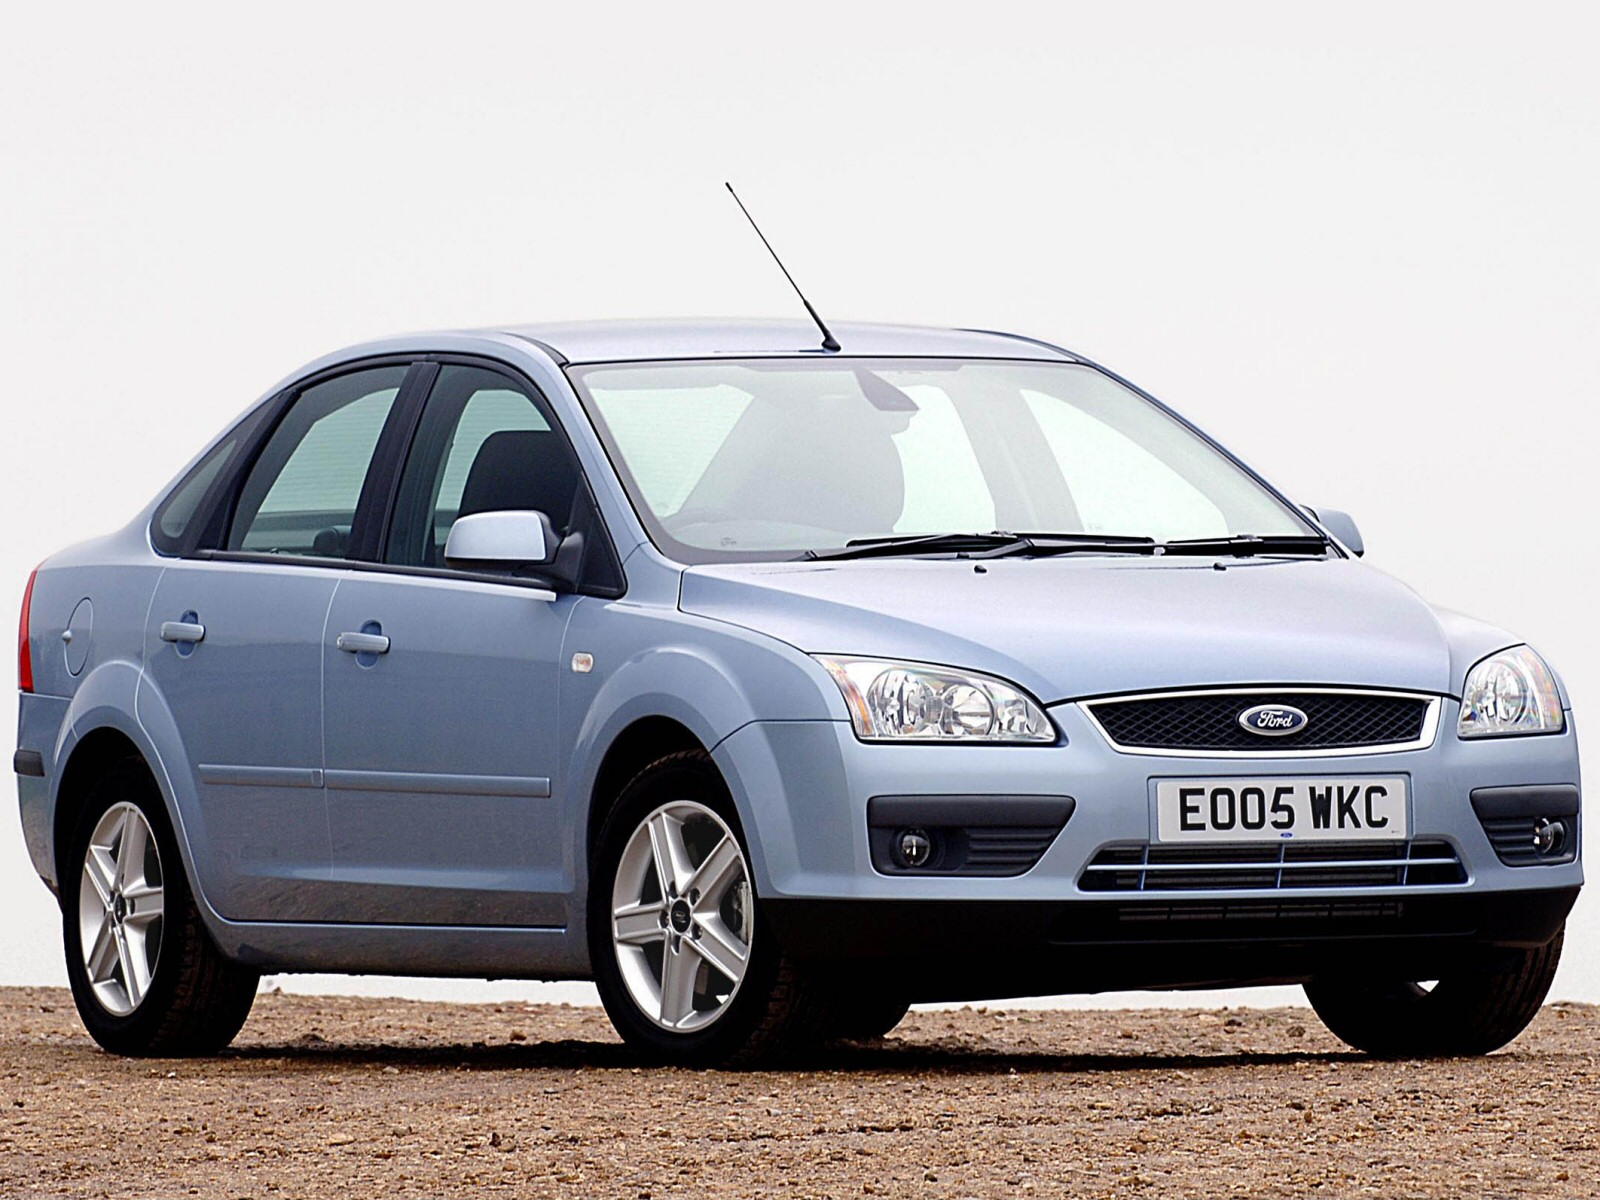 Car in pictures car photo gallery » Ford Focus Sedan